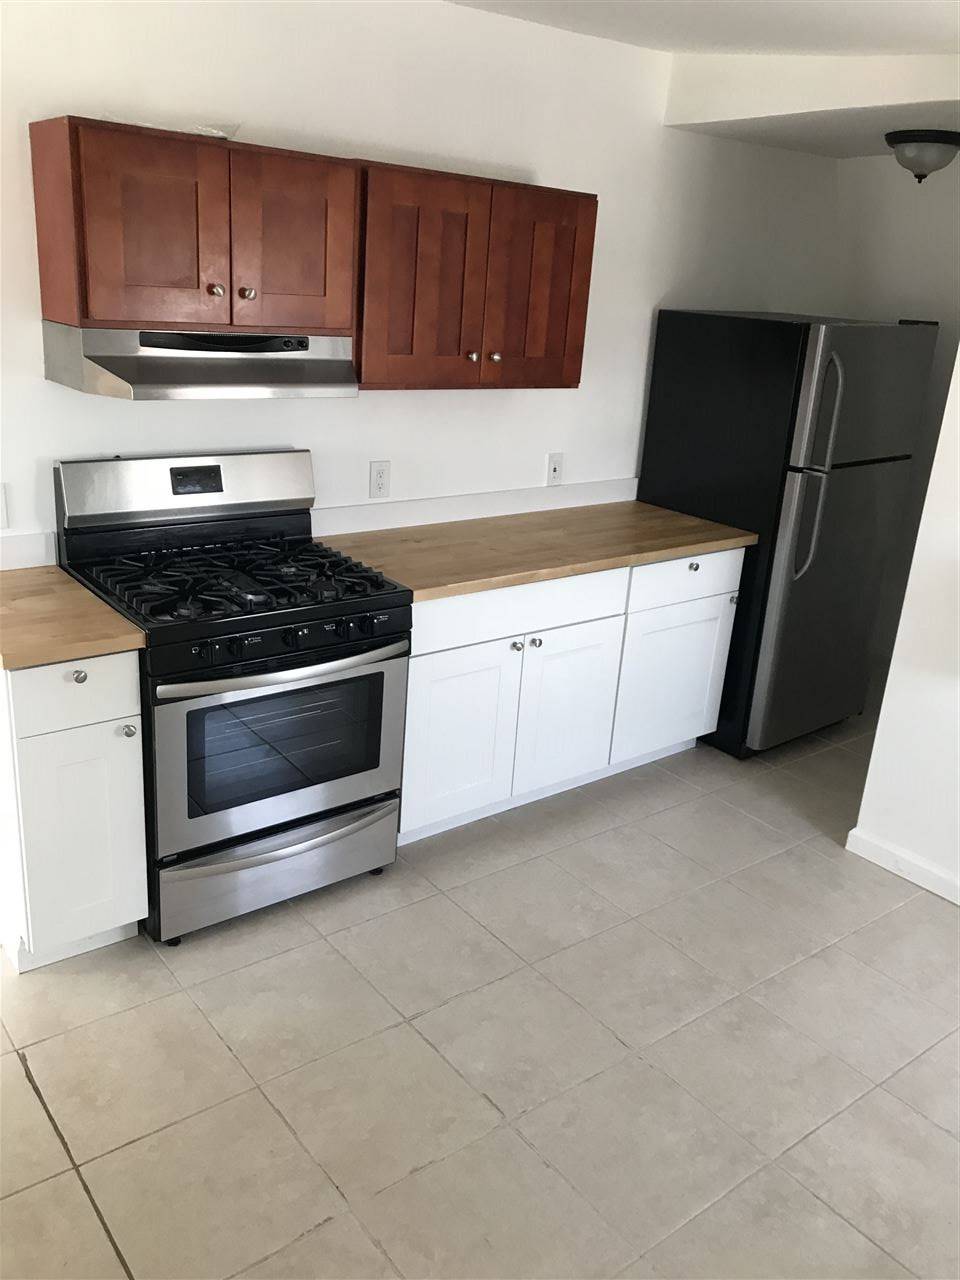 Stainless Steel appliances are 1 year young - 2 BR New Jersey